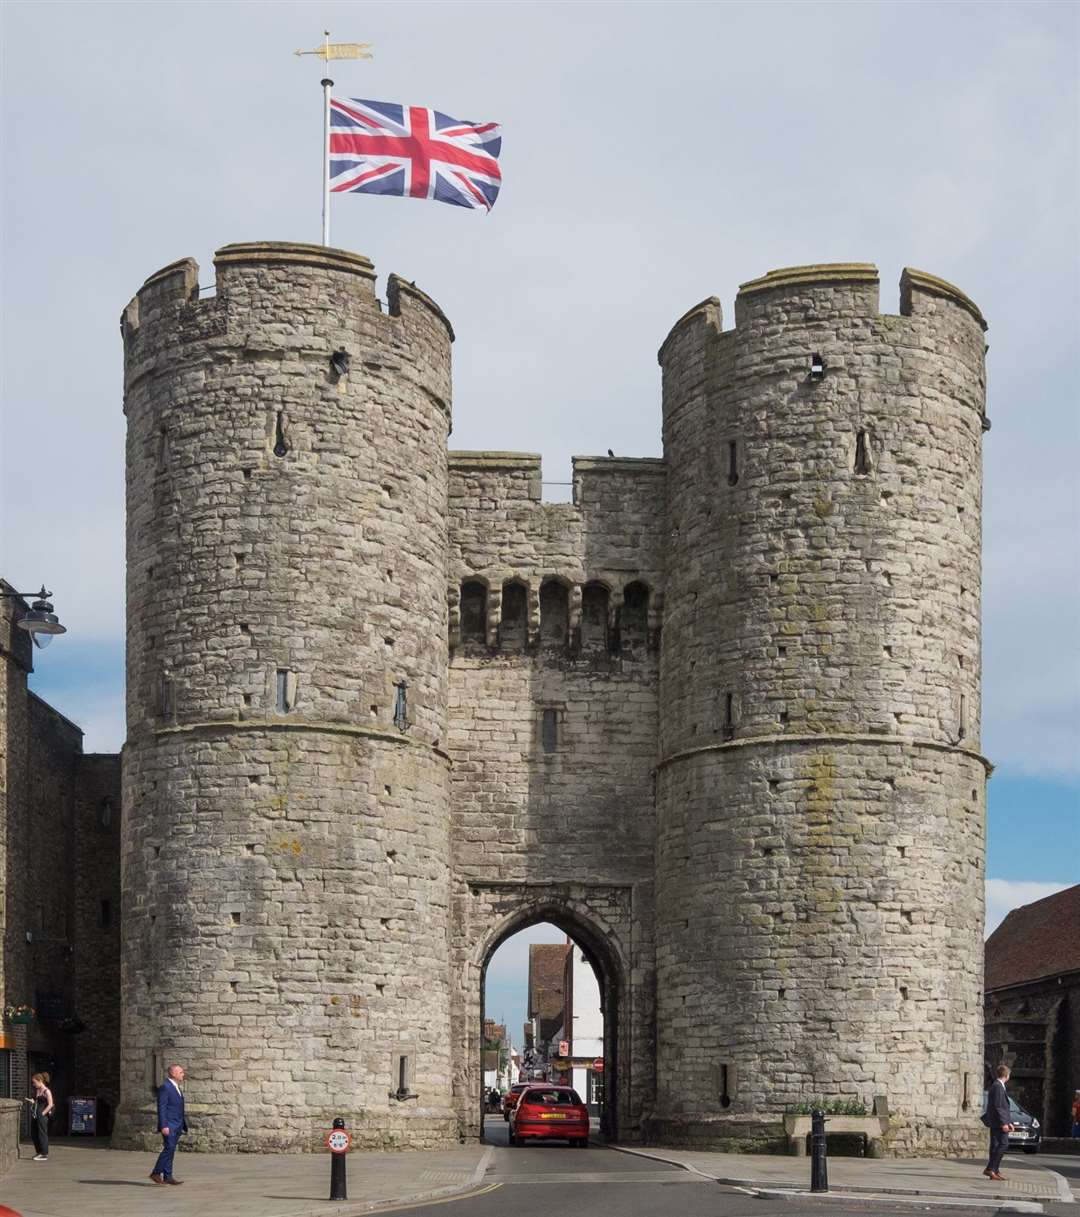 The attack happened near the Westgate Towers in Canterbury